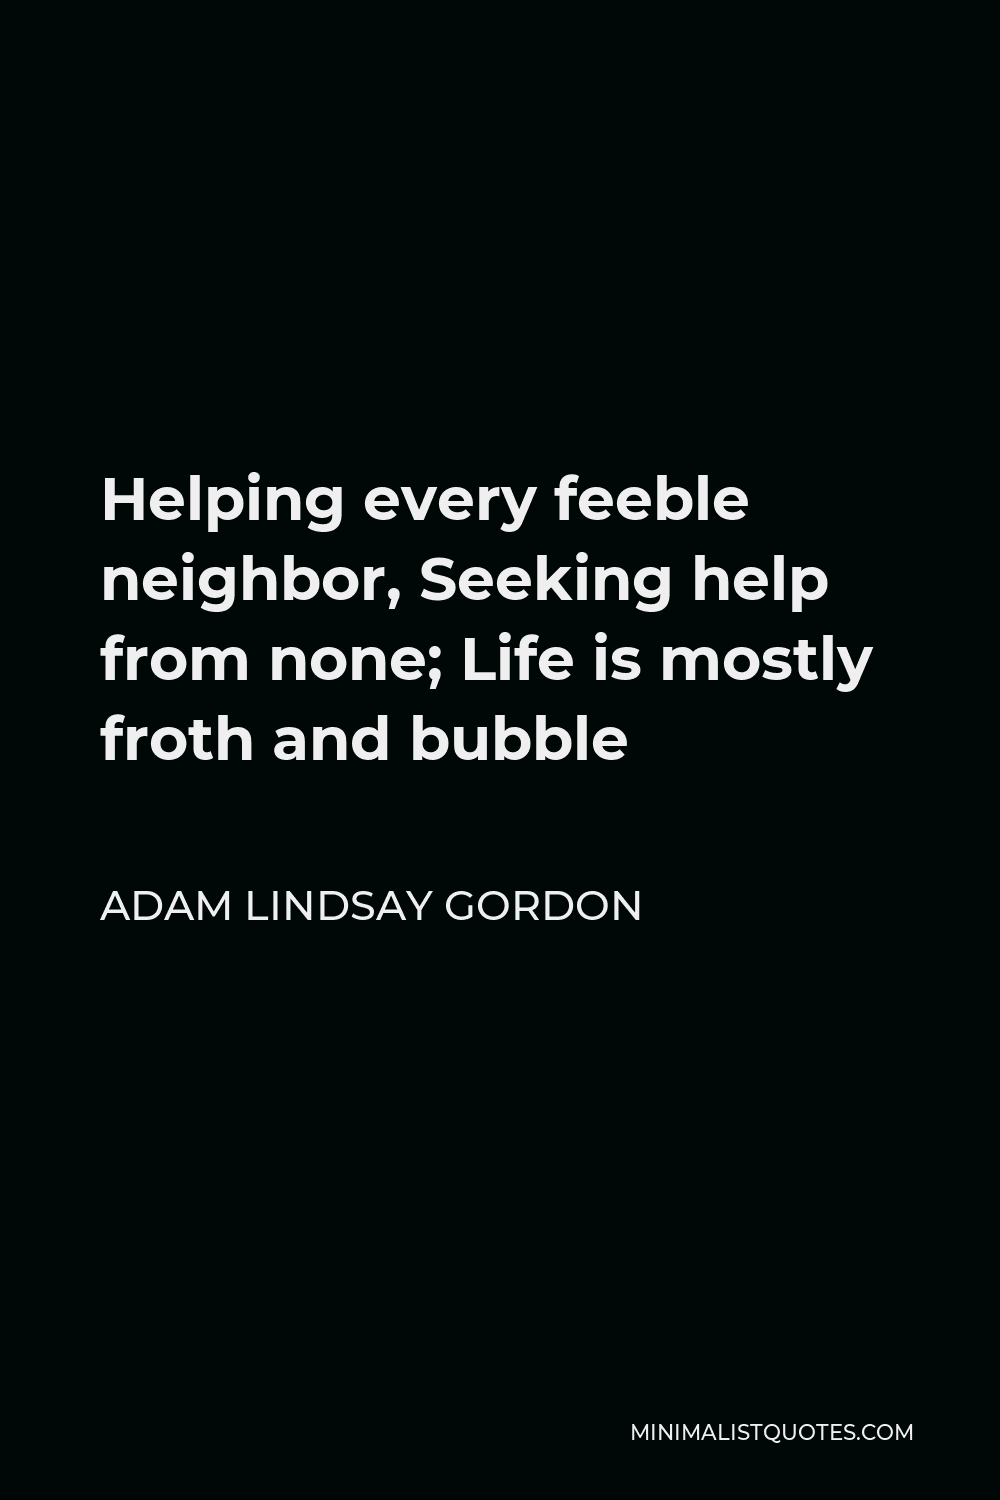 Adam Lindsay Gordon Quote - Helping every feeble neighbor, Seeking help from none; Life is mostly froth and bubble